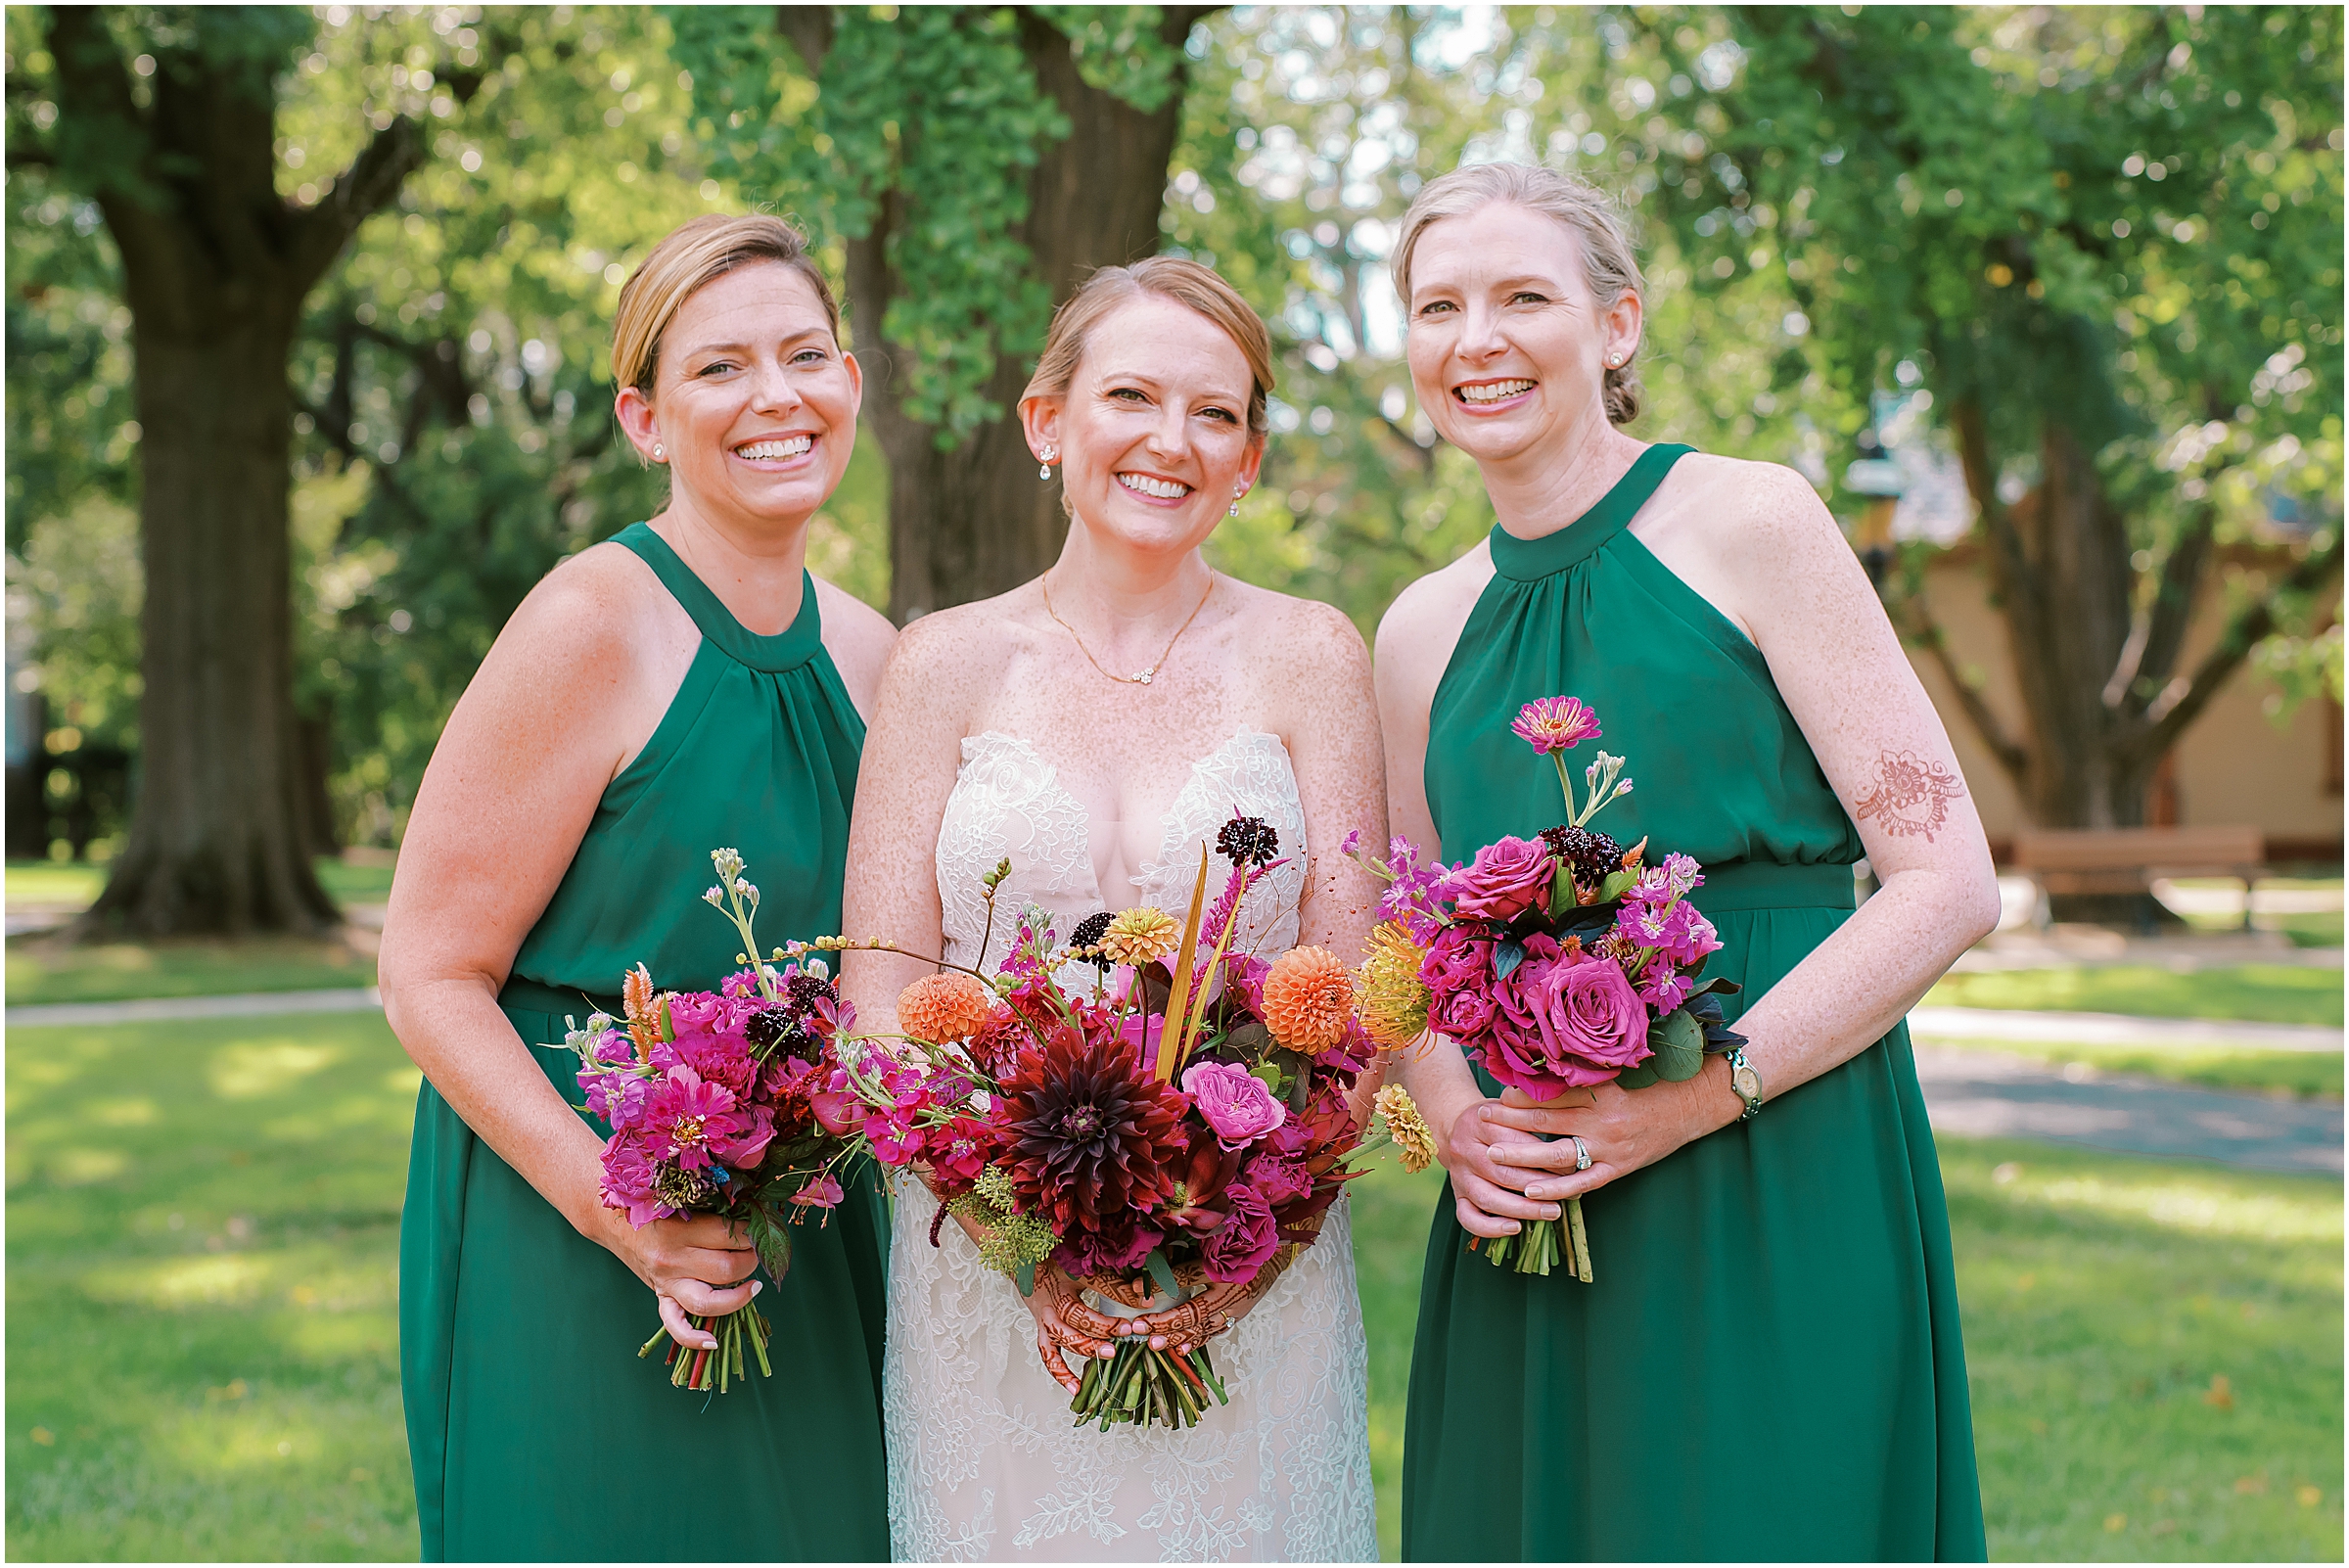 Bride and bridesmaids with bold and colorful wedding bouquets